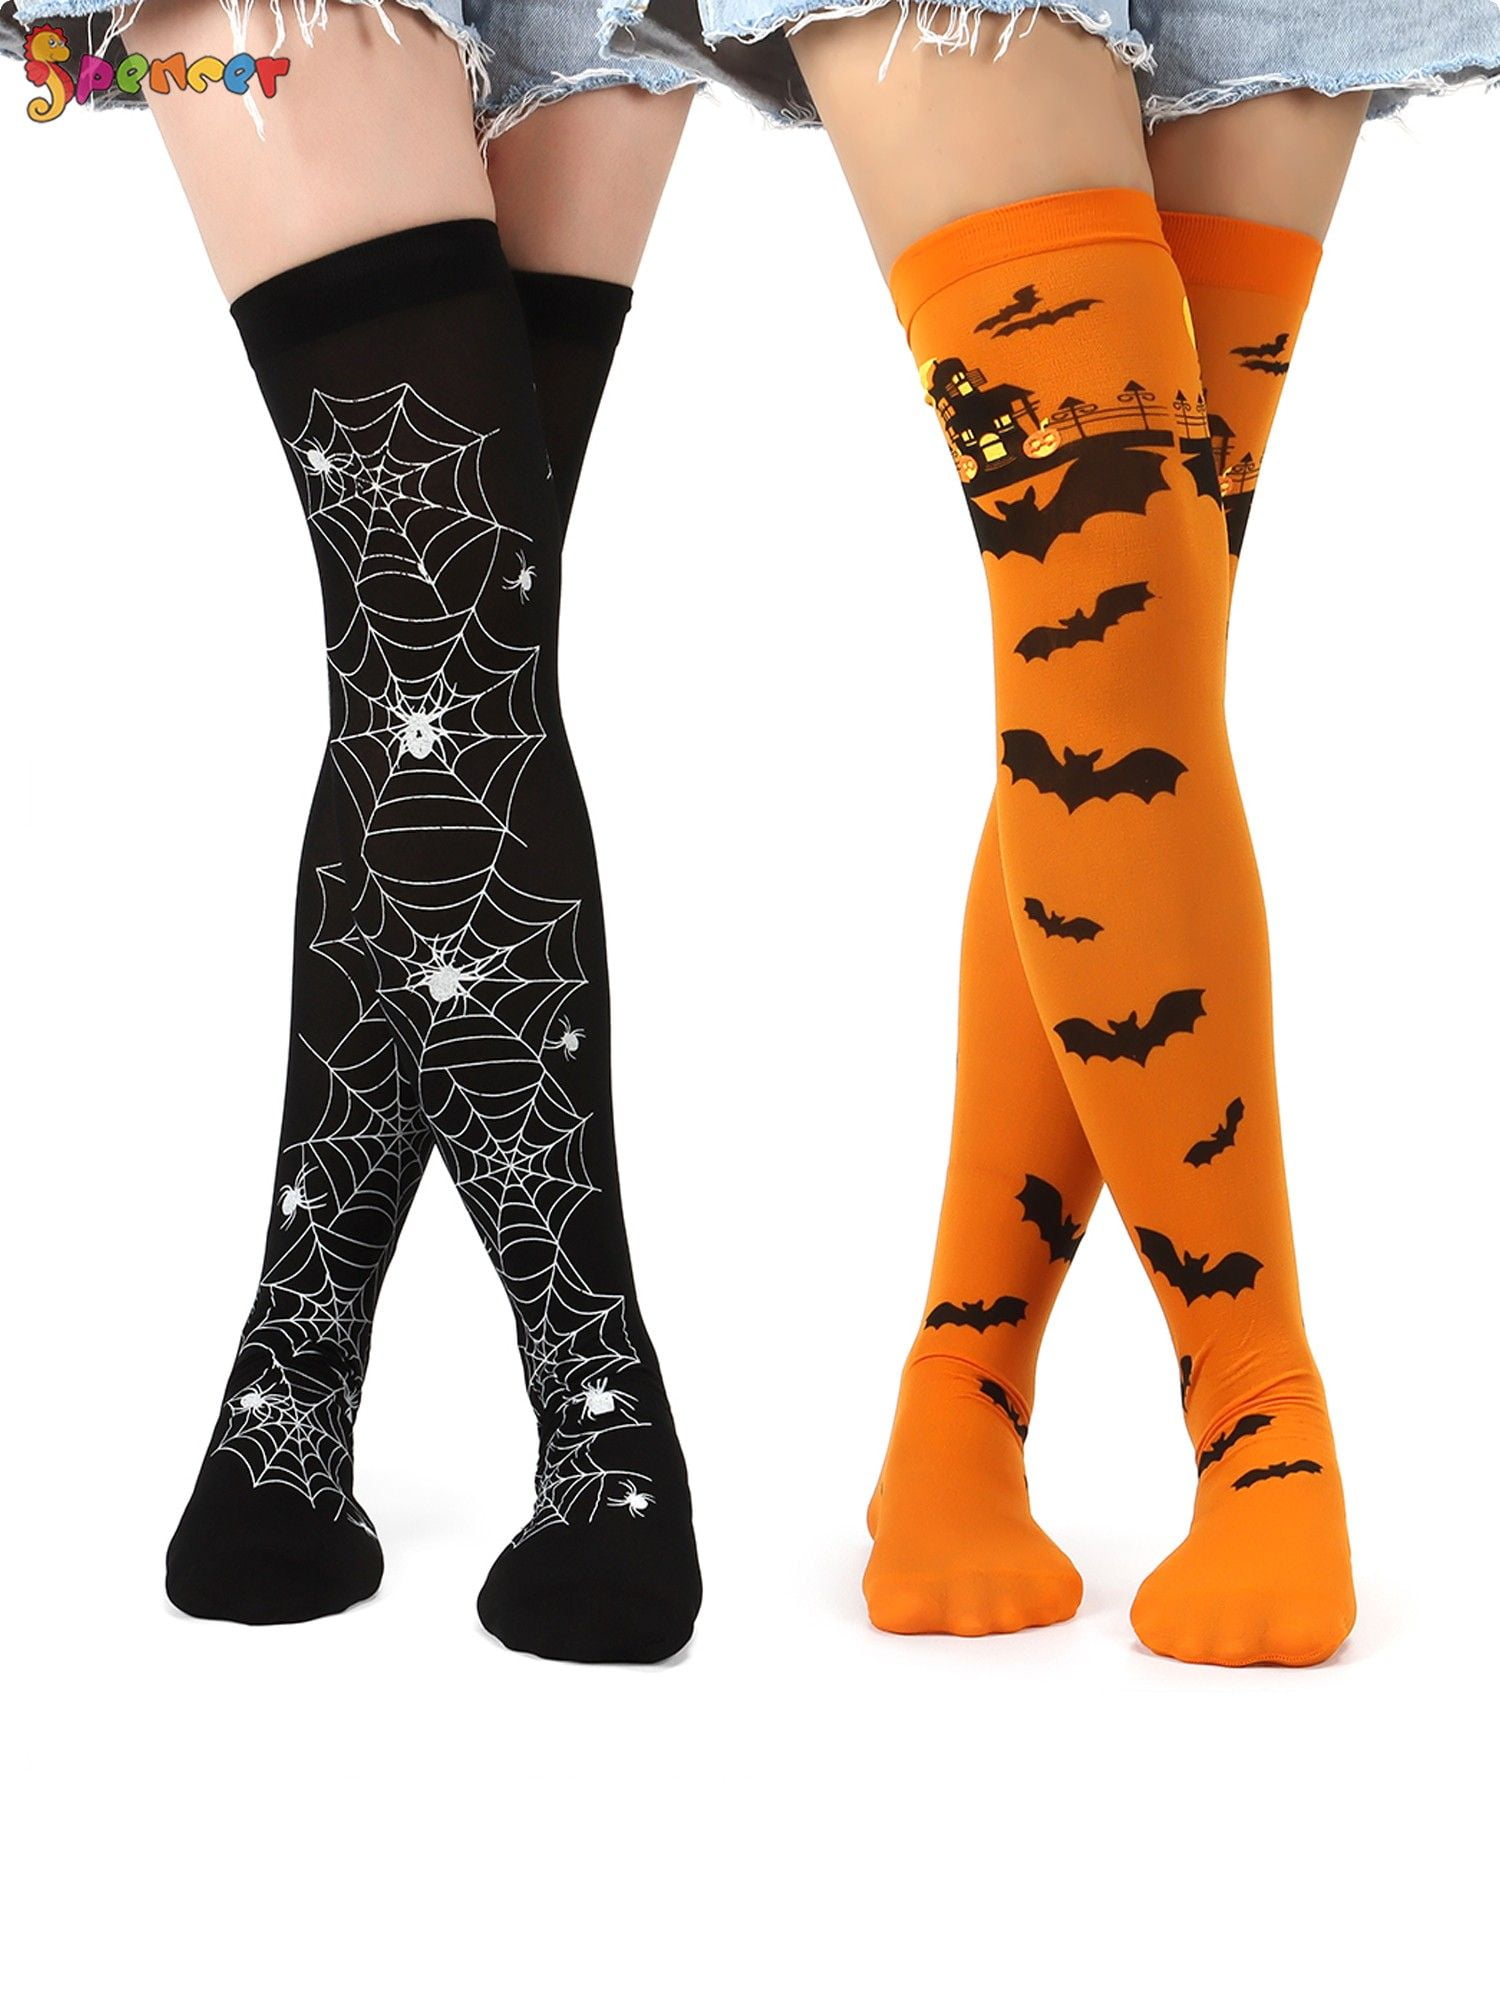 Spencer 2 Pairs Halloween Thigh High Long Stockings Over the Knee ...